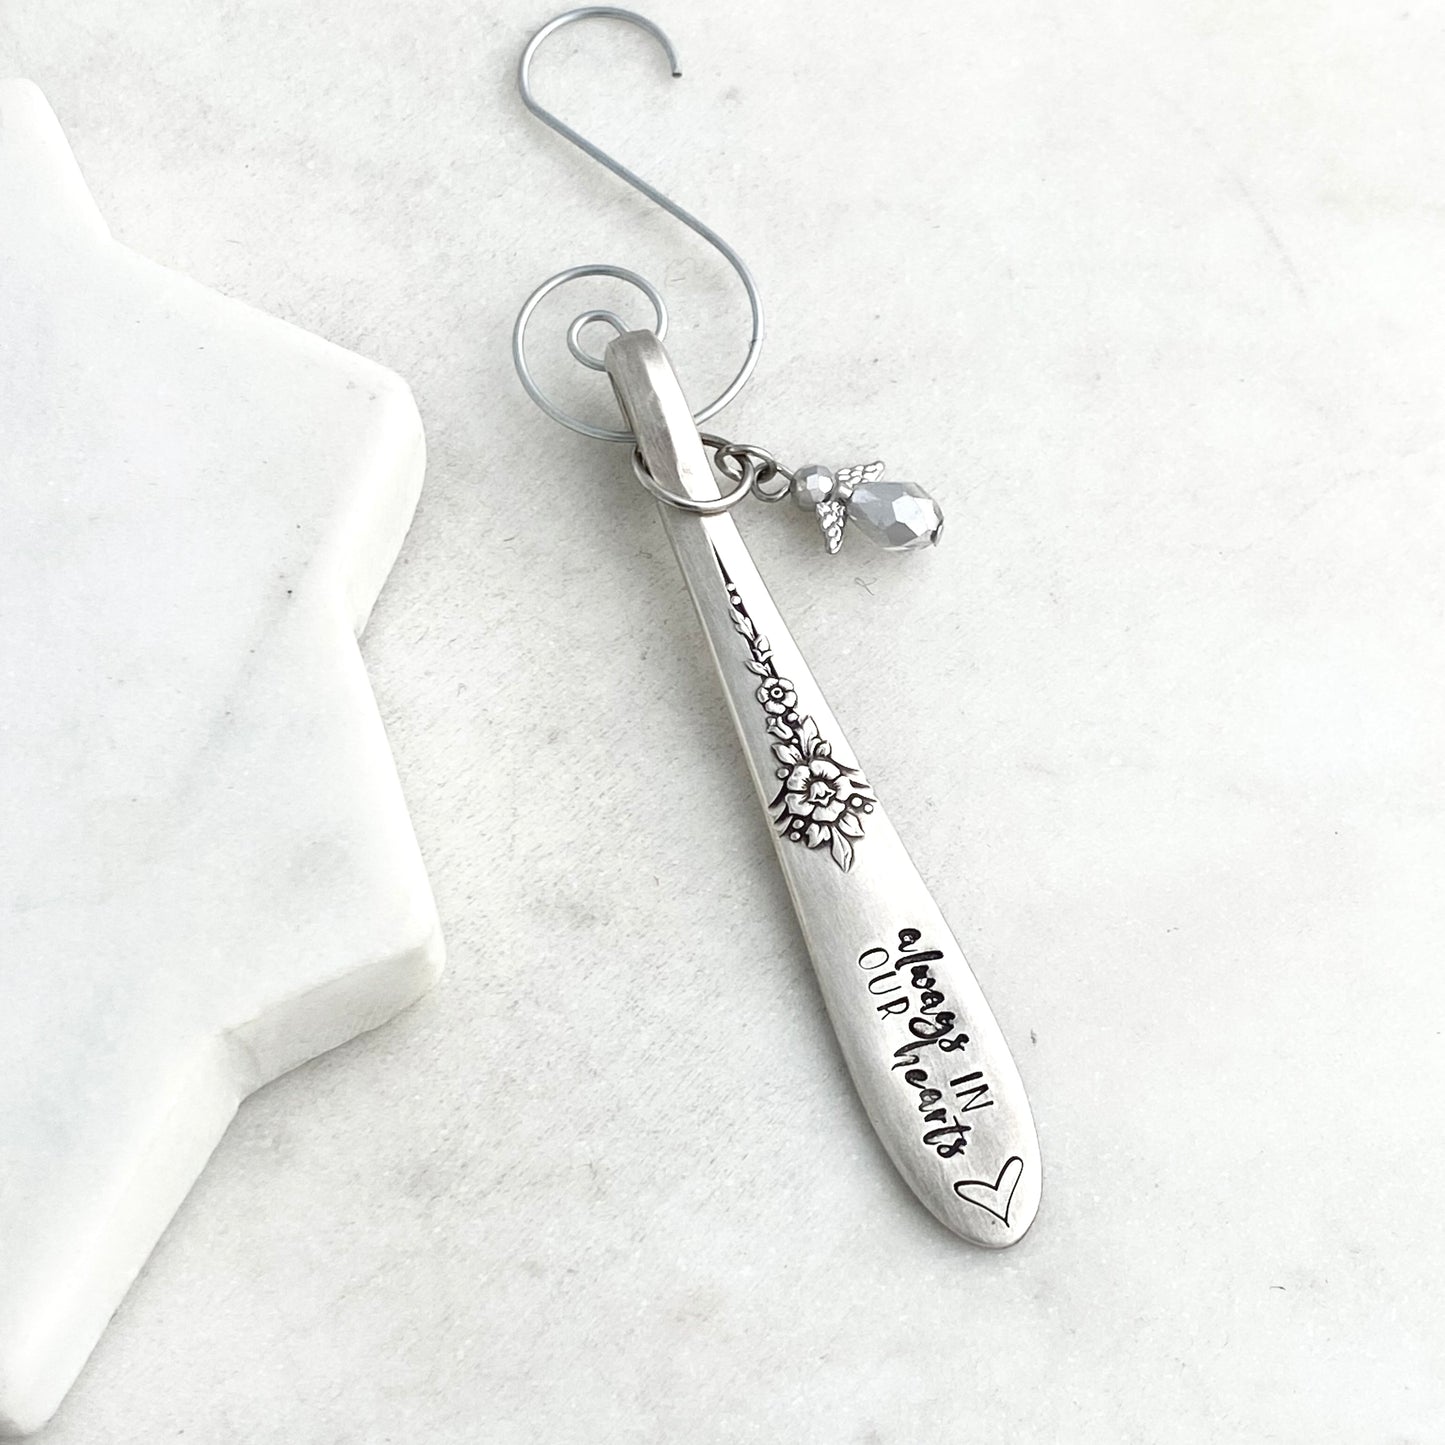 Always in our Hearts a, Angel Charm Ornament, Hand Stamped Vintage Spoon Ornament Ornaments callistafaye   